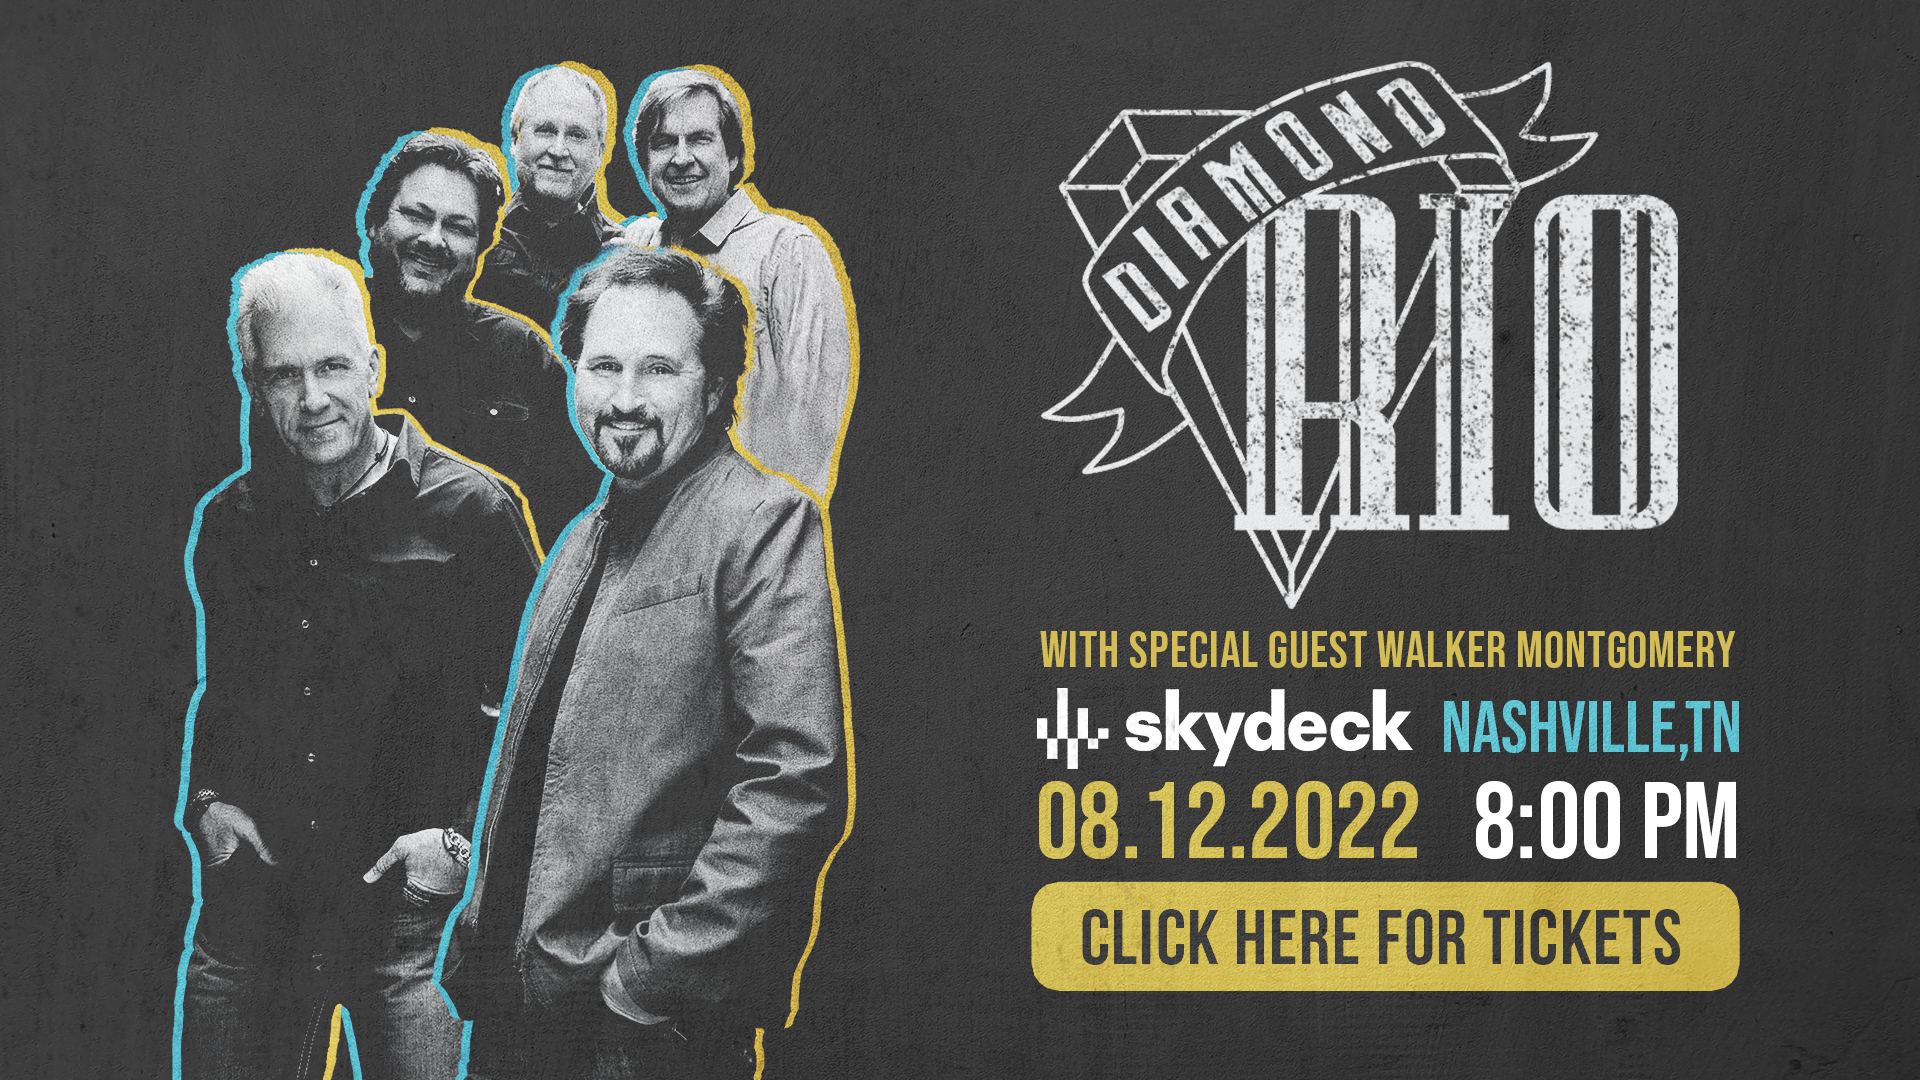 Promo image of Diamond Rio with Special Guest Walker Montgomery on Skydeck